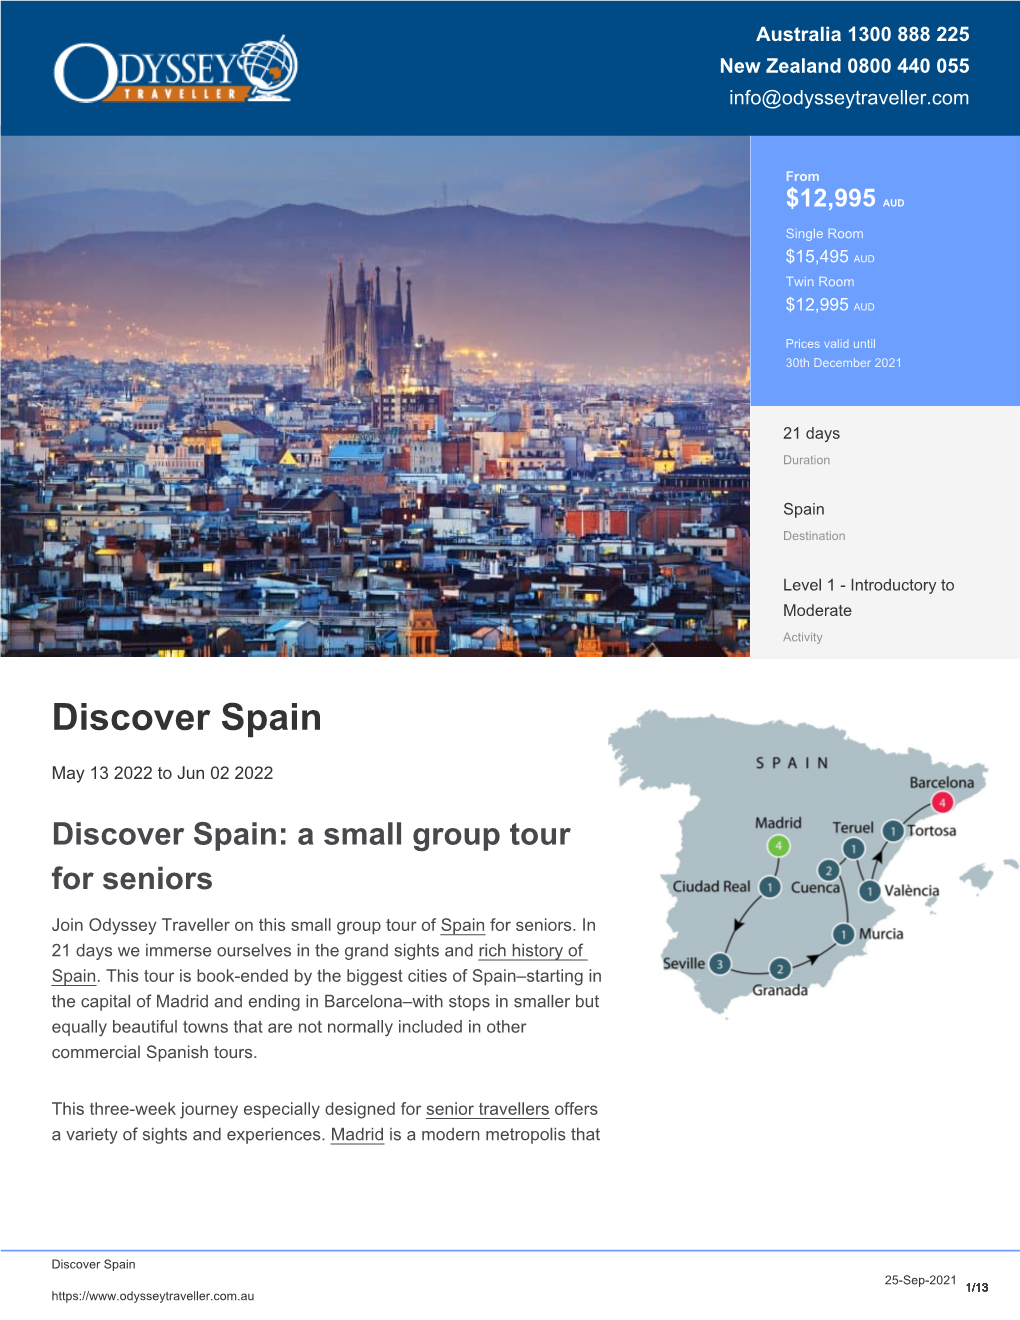 Discover Spain: Small Group Tour for Seniors | Odyssey Traveller